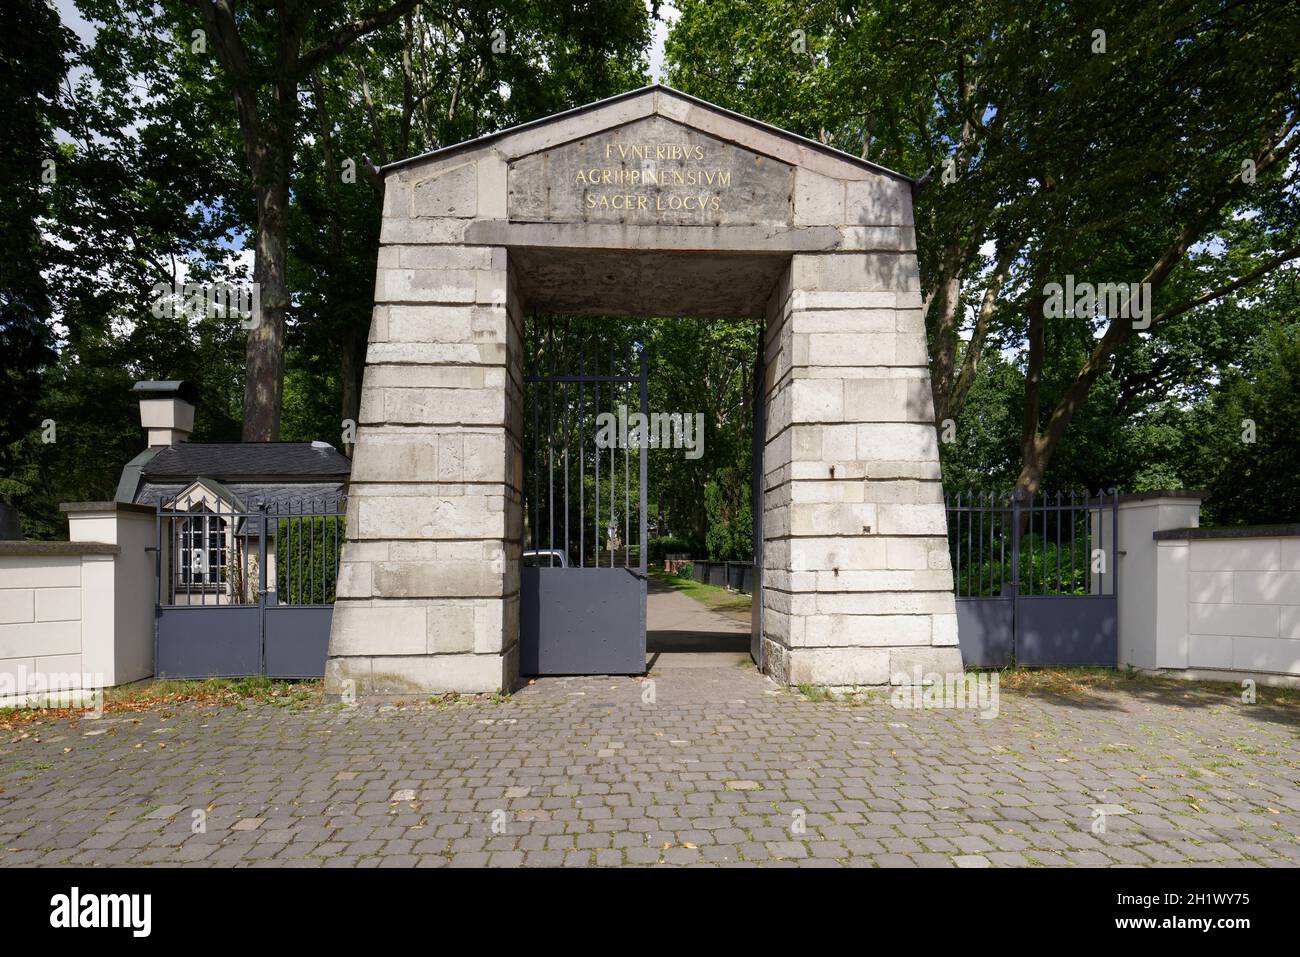 Cologne, Germany - August 10, 2021: the monumental gate of the main entrance to the Melaten cemetery with the inscription 'Funeribus Agrippinensium sa Stock Photo